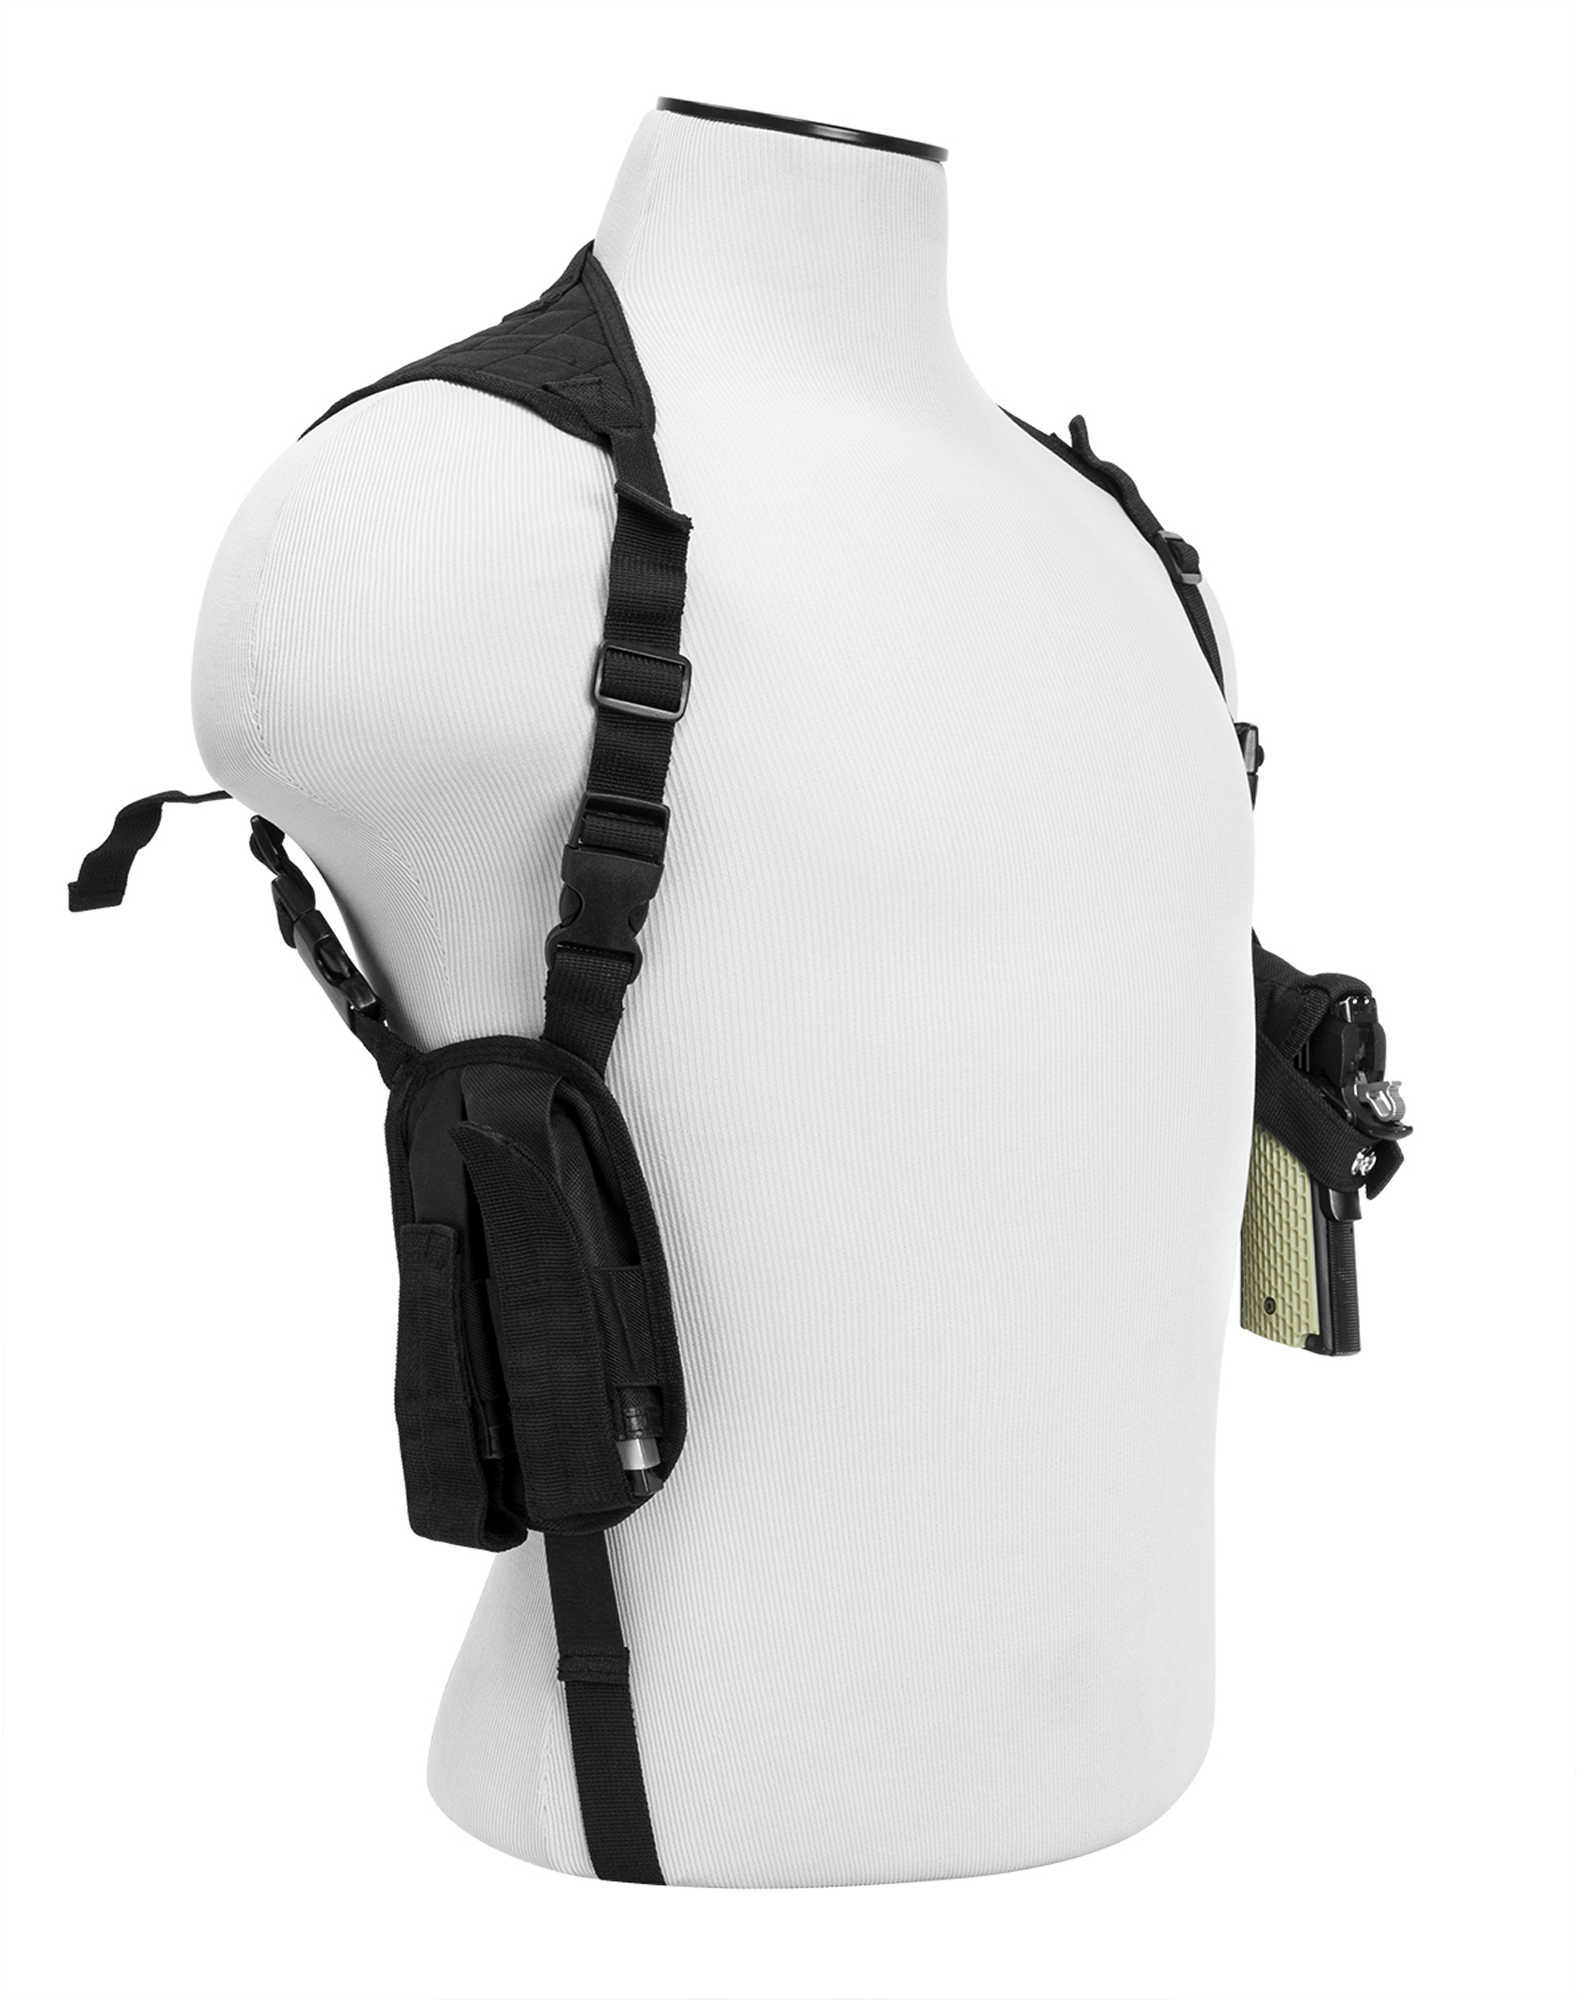 NCSTAR Shoulder Holster Nylon Black Fully Adjustable Includes Pistol and Dual Magazine Pouch CV2909